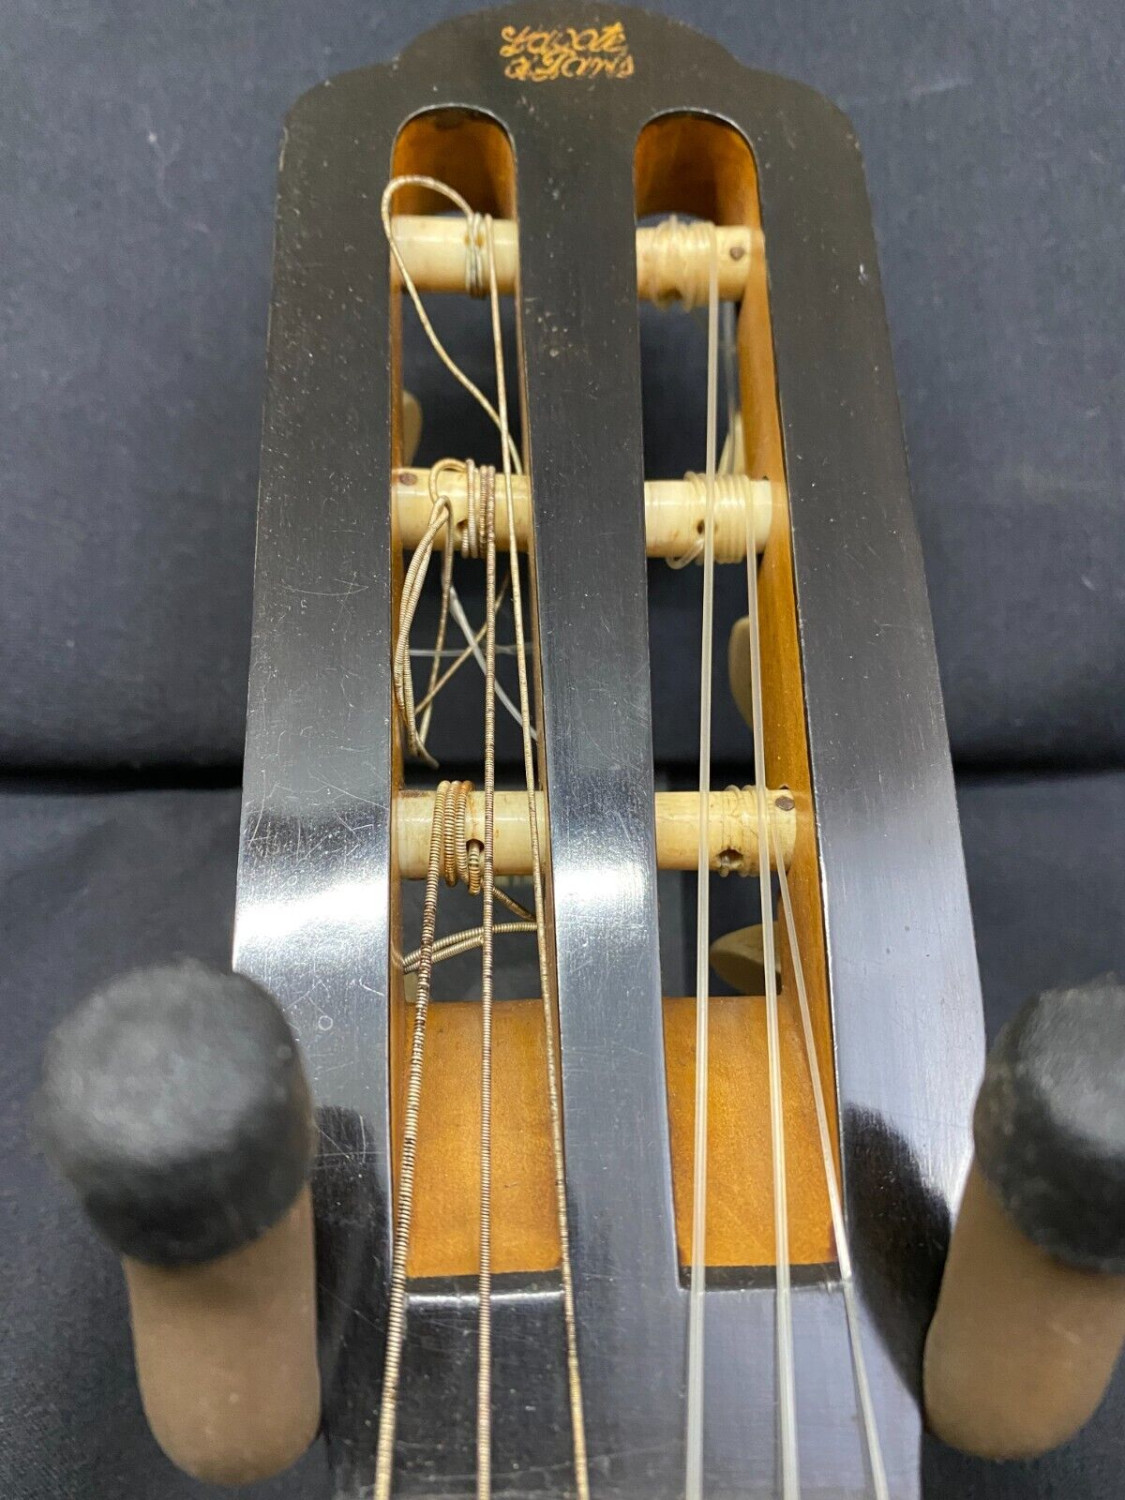 René Lacote a Paris with Inlaid Tuners SOLD